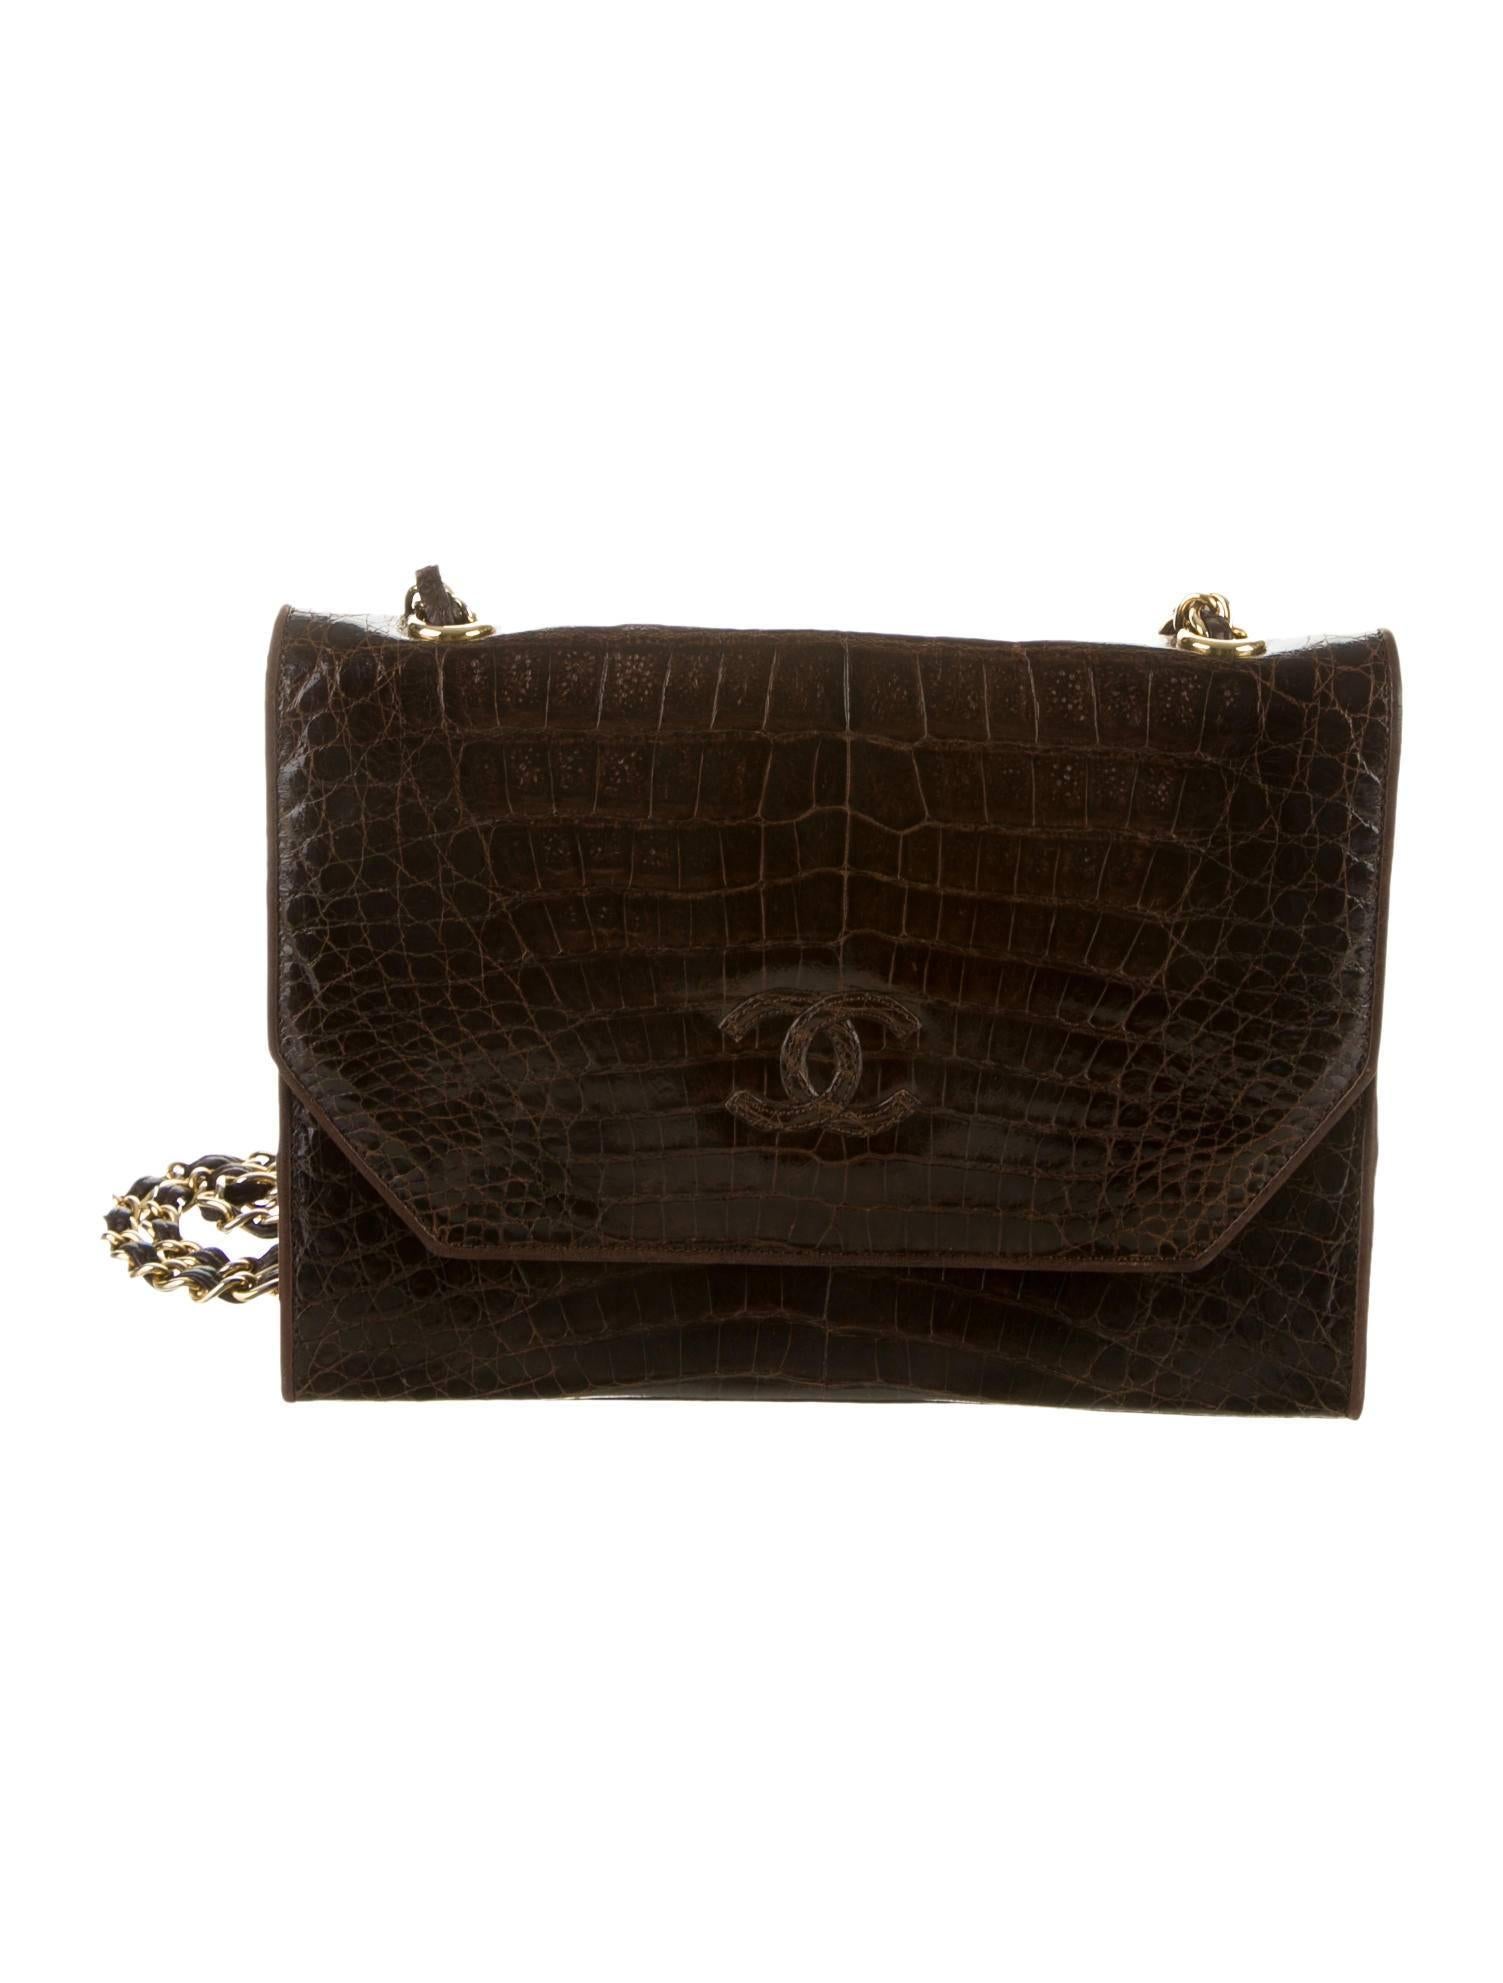 CURATOR'S NOTES

Hot CoCo anyone? Stunning rich chocolate brown crocodile Chanel shoulder bag featuring gold tone hardware, chain-link and leather shoulder strap and leather lining.  A rare find in this condition.  A chic, wearable